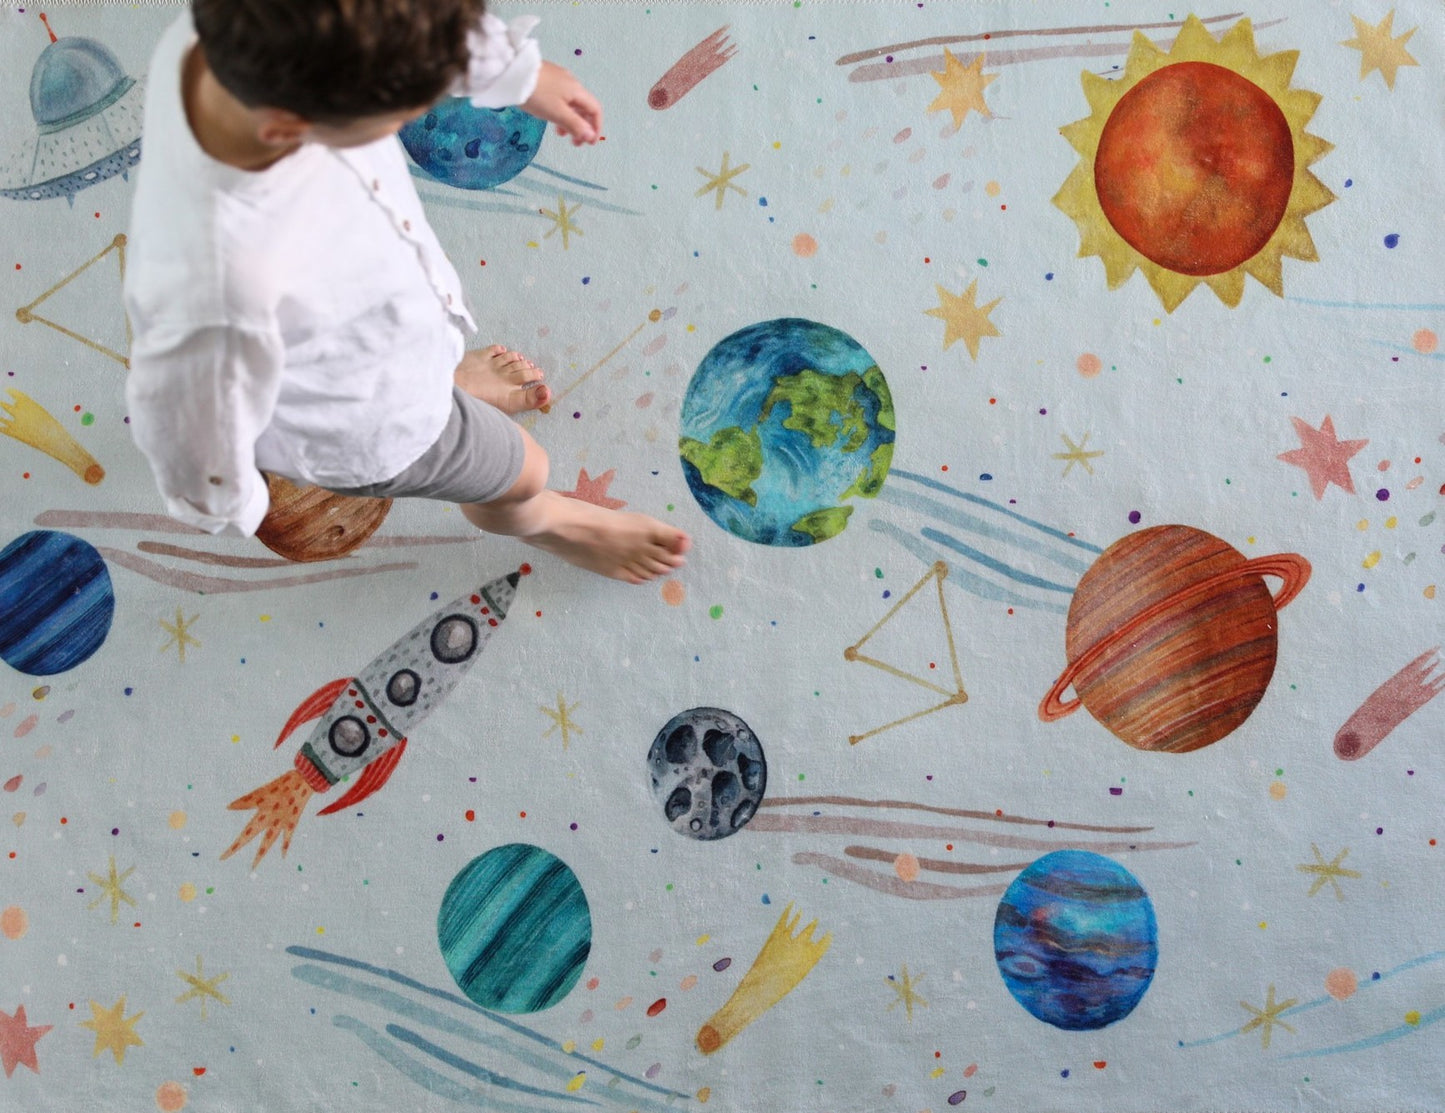 space planet solar system carpet for kids. space planet solar system rug for kids room. Machine washable and nontoxic rug